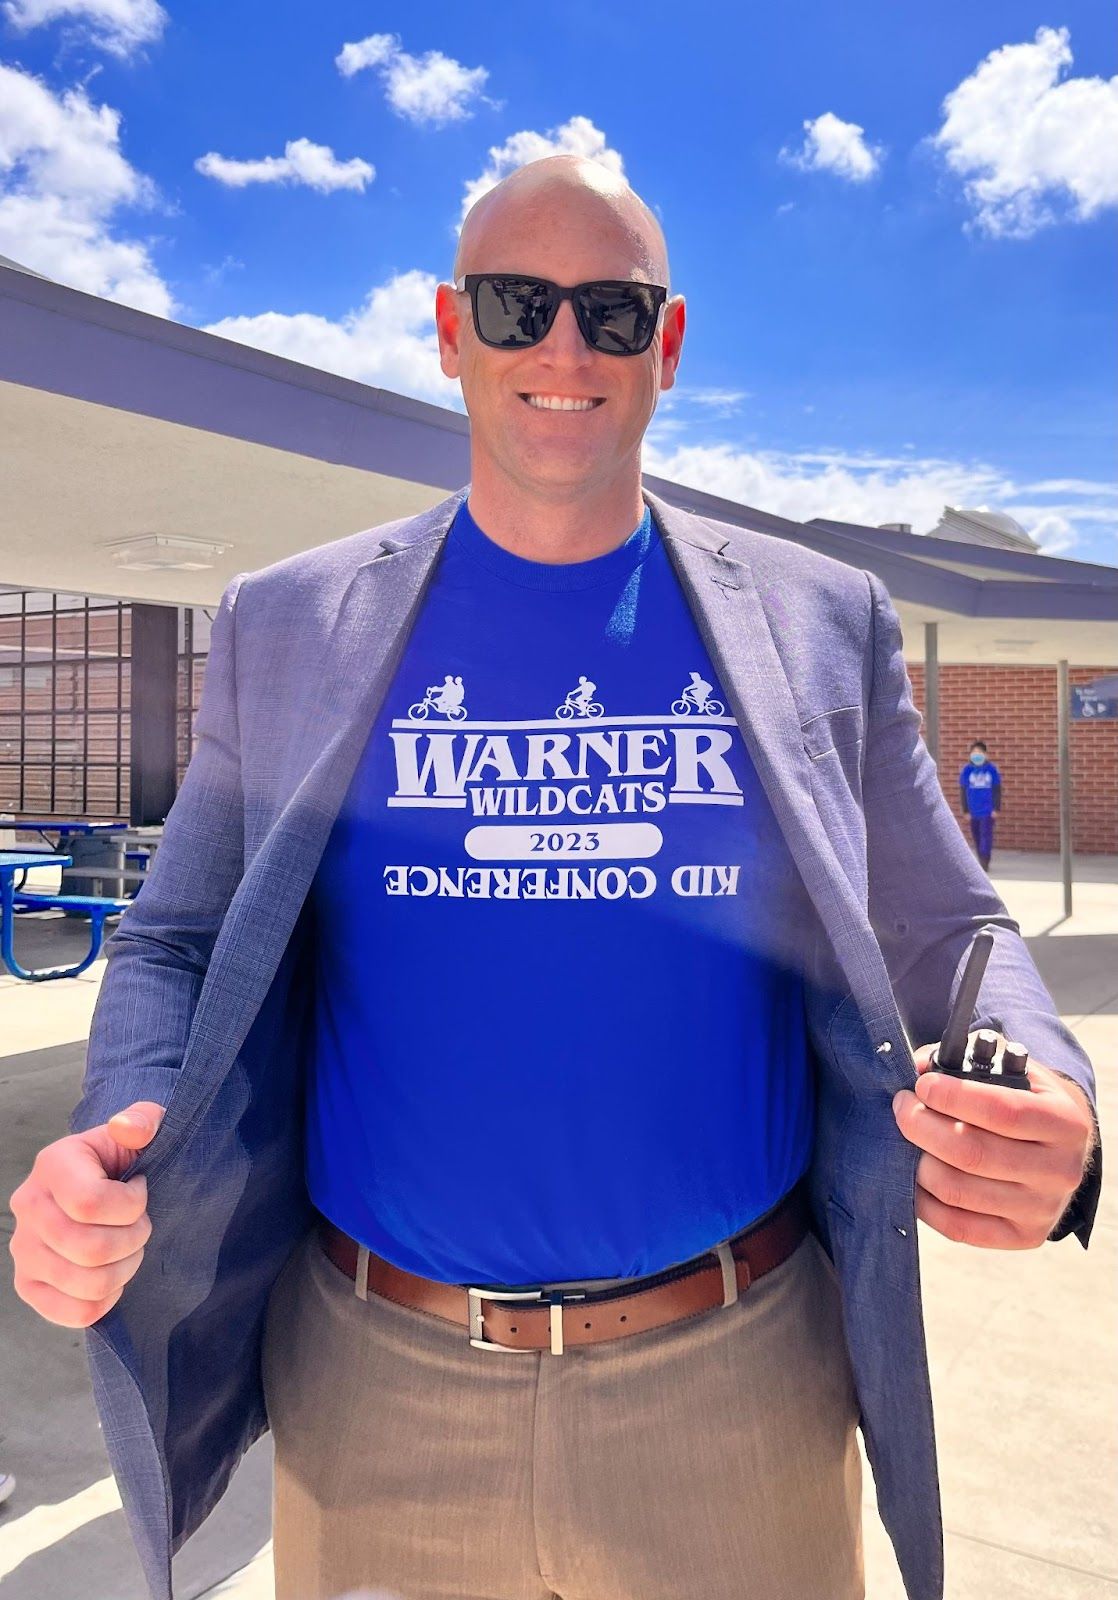 Warner Middle School's Principal Kenneth Lopour, Ed.D., wears the T-shirt for this year's Kid Conference at the Westminster school. Dr. Lopour said the event leaves an uplifting feeling on campus for weeks afterwards. Photo by Jeannette Andruss.